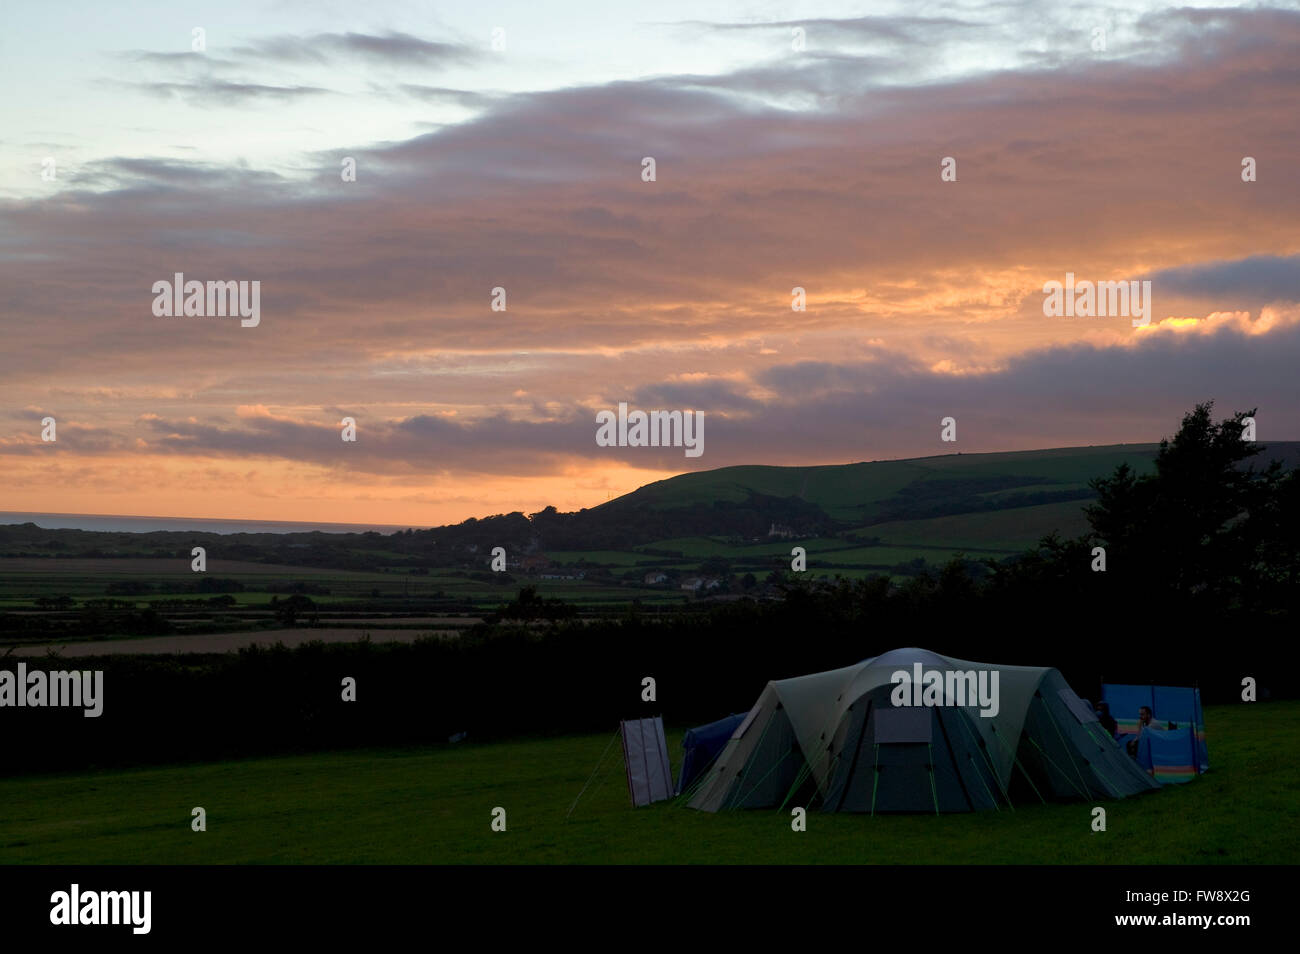 The sunsets over the coast and in the foreground a tent is pitched in a field. The campers are gathered around the tent maybe eating an evening meal in this idylic summer holiday scene. Stock Photo